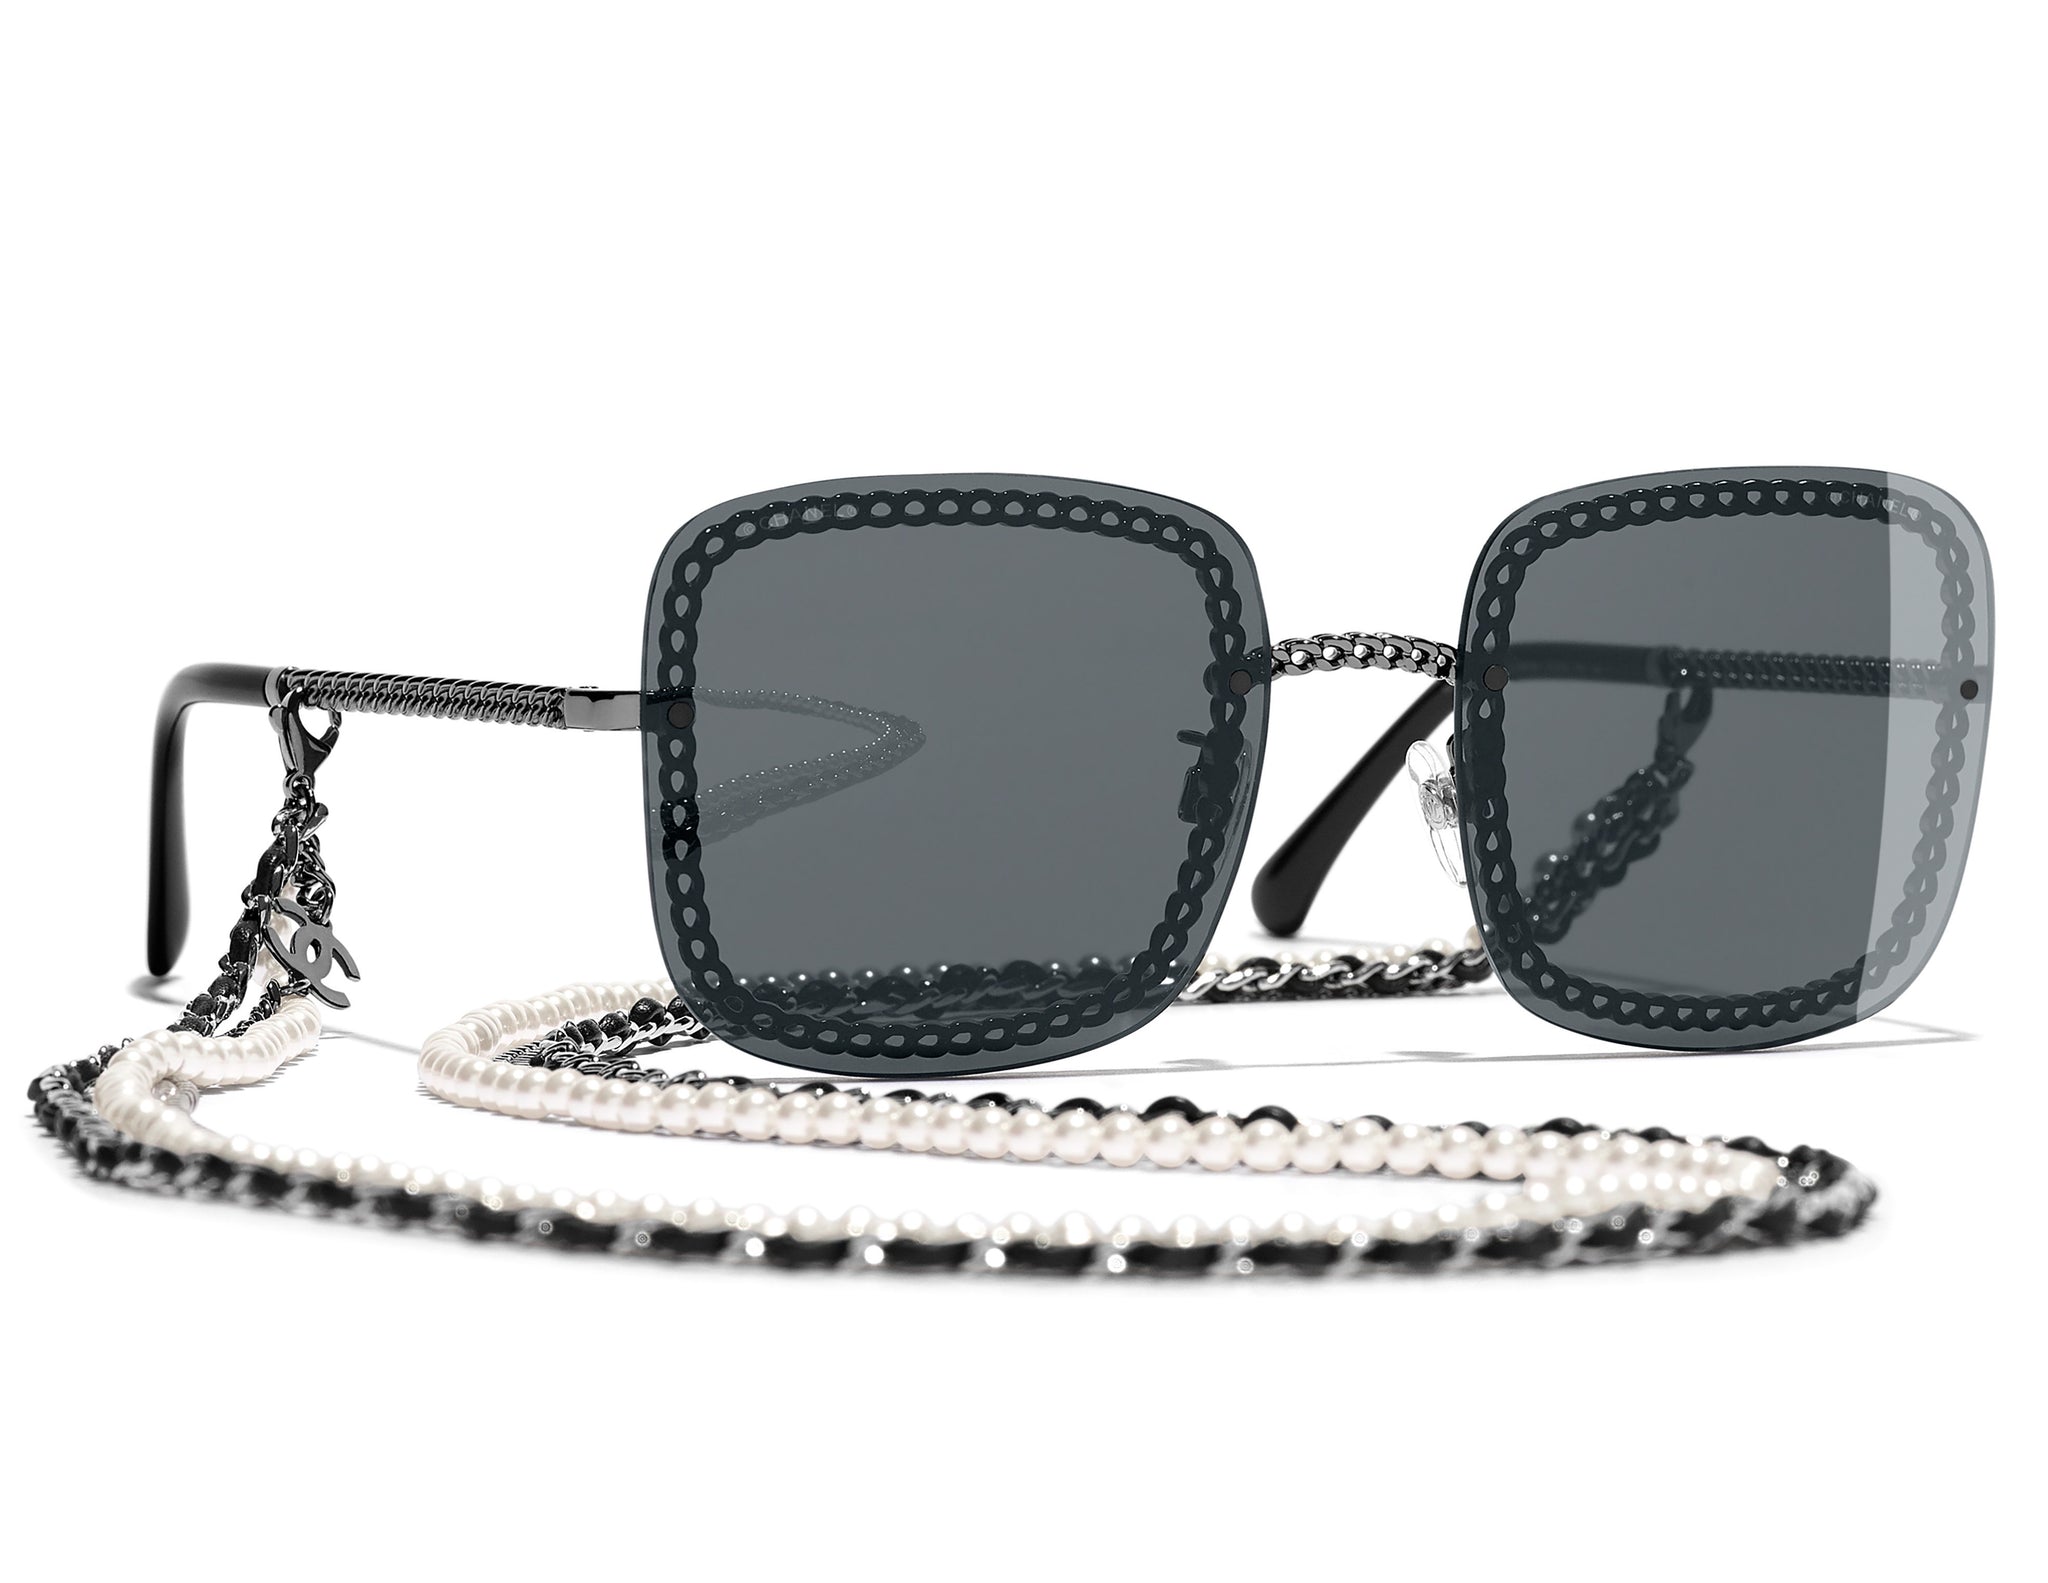 NEW, AUTHENTIC CHANEL 4244 Sunglasses with Chain  Women accessories, Chanel  accessories, Sunglasses accessories